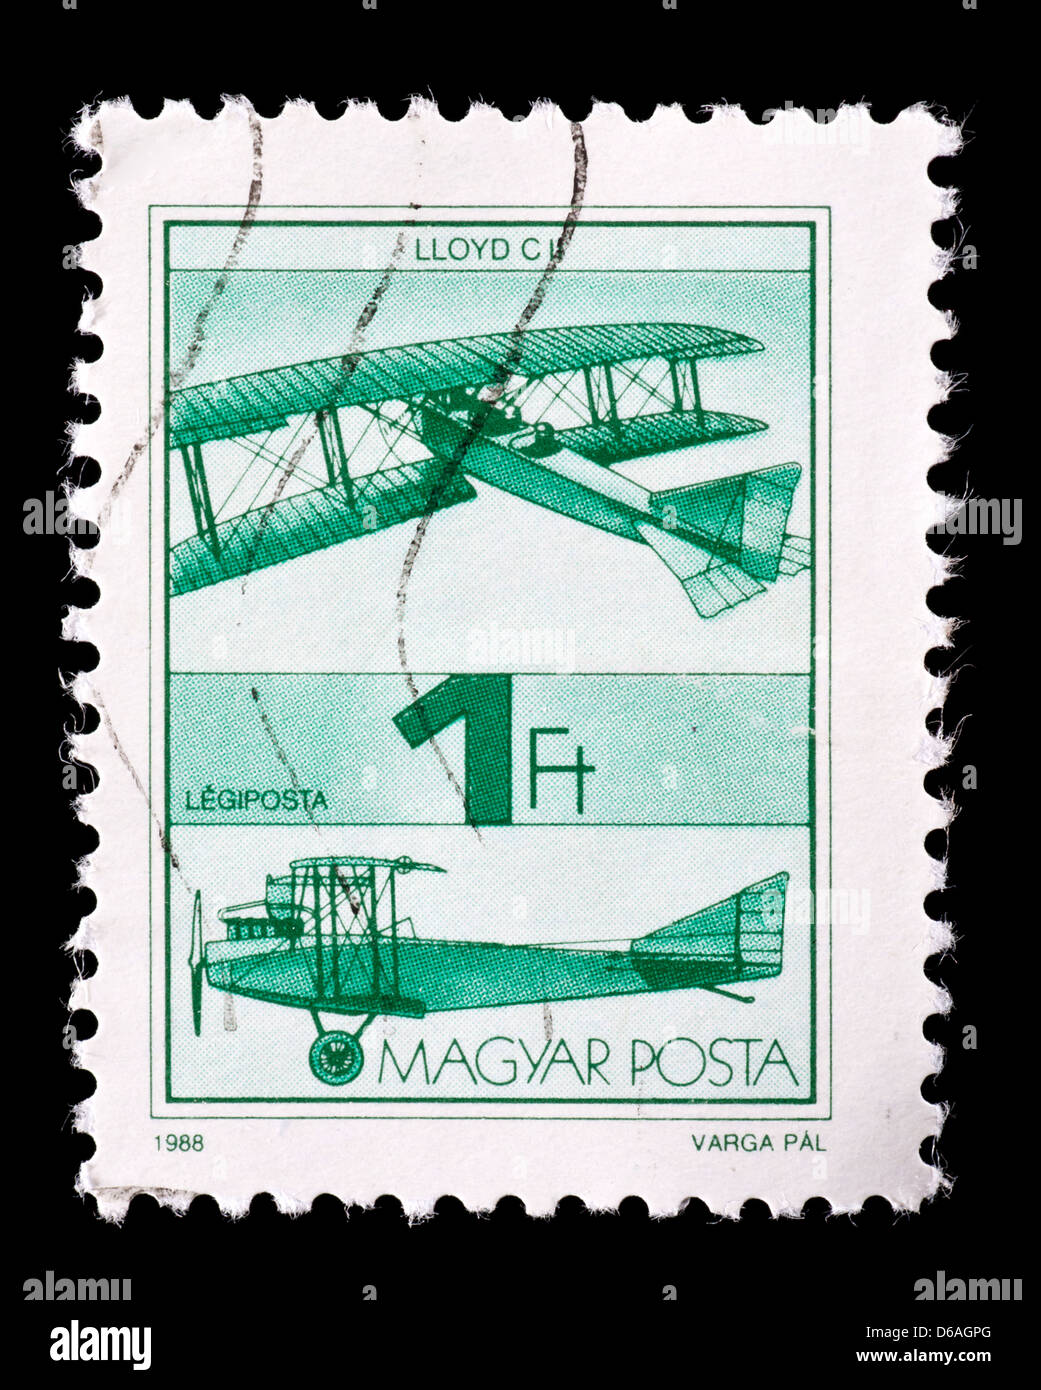 Postage stamp from Hungary depicting a Lloyd CII biplane. Stock Photo